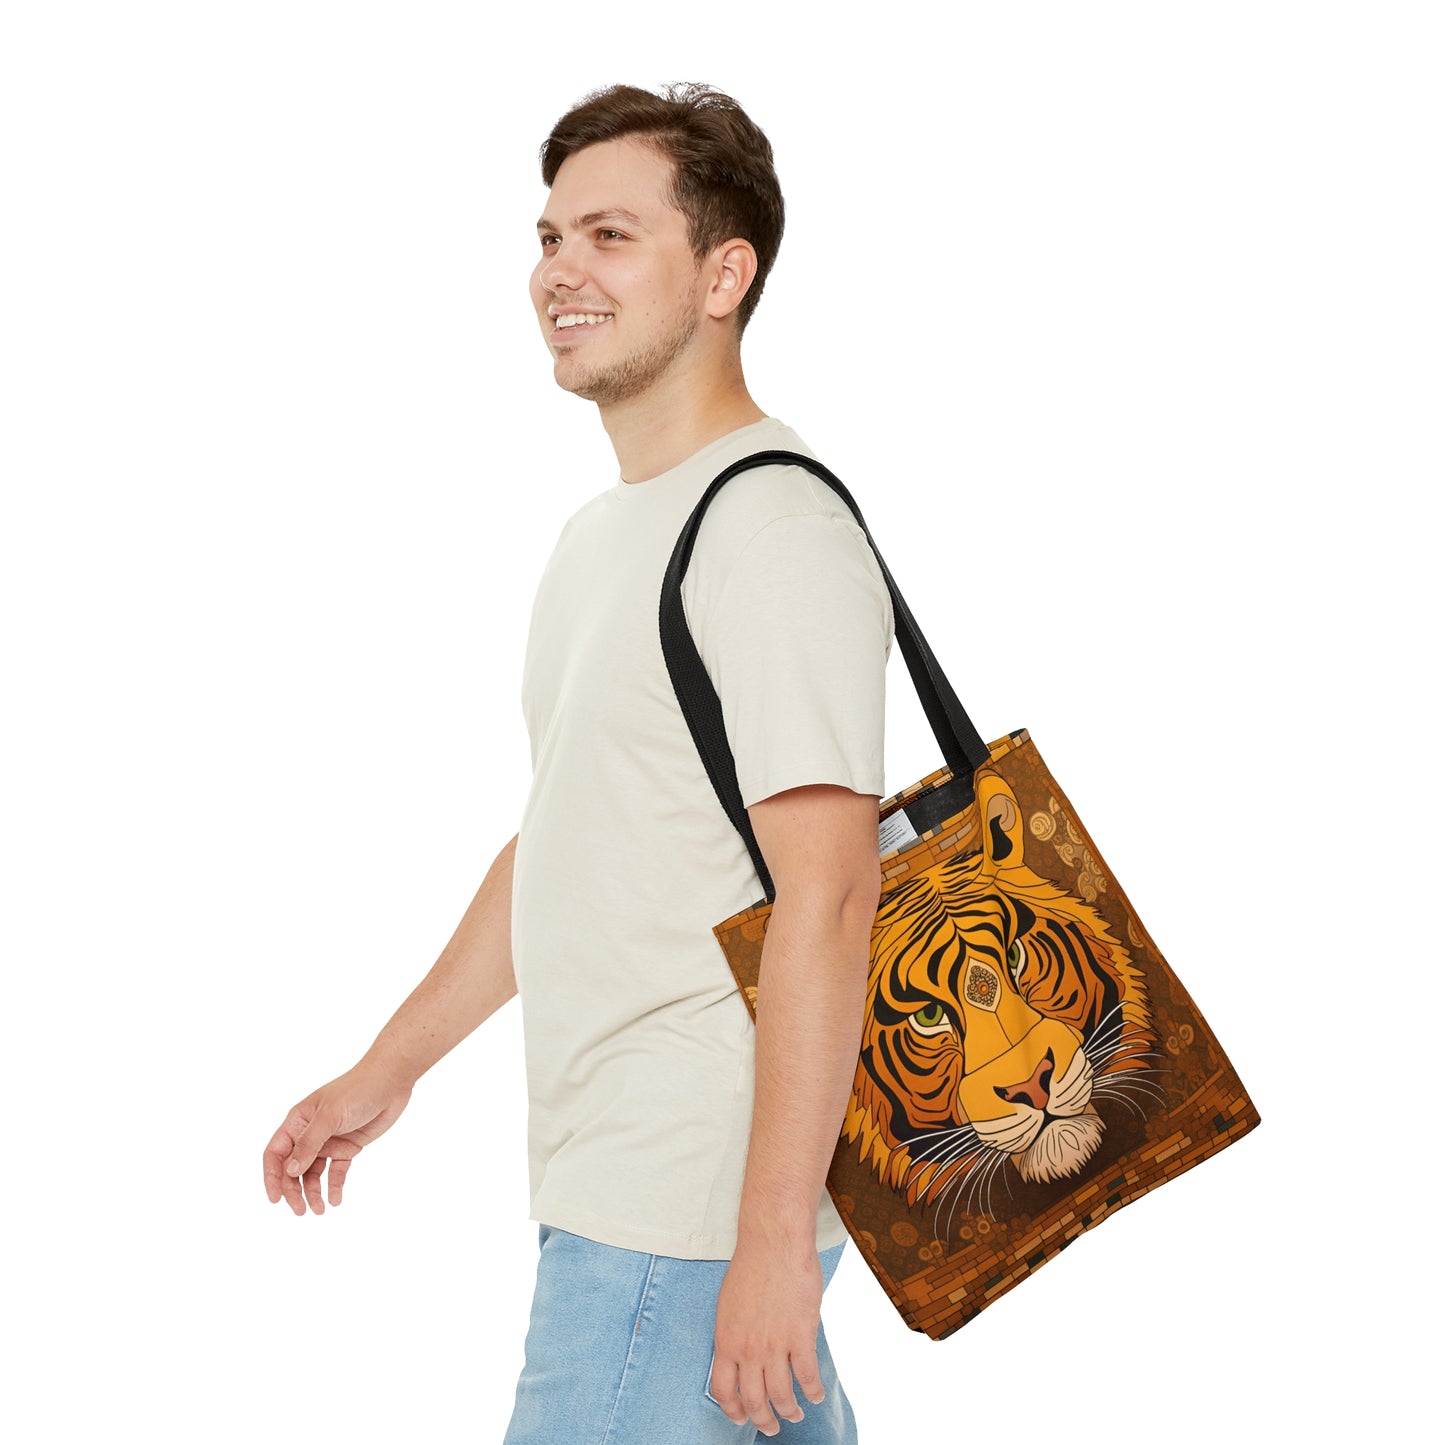 Tiger Head in the Style of Gustav Klimt Printed on Tote Bag small with male model